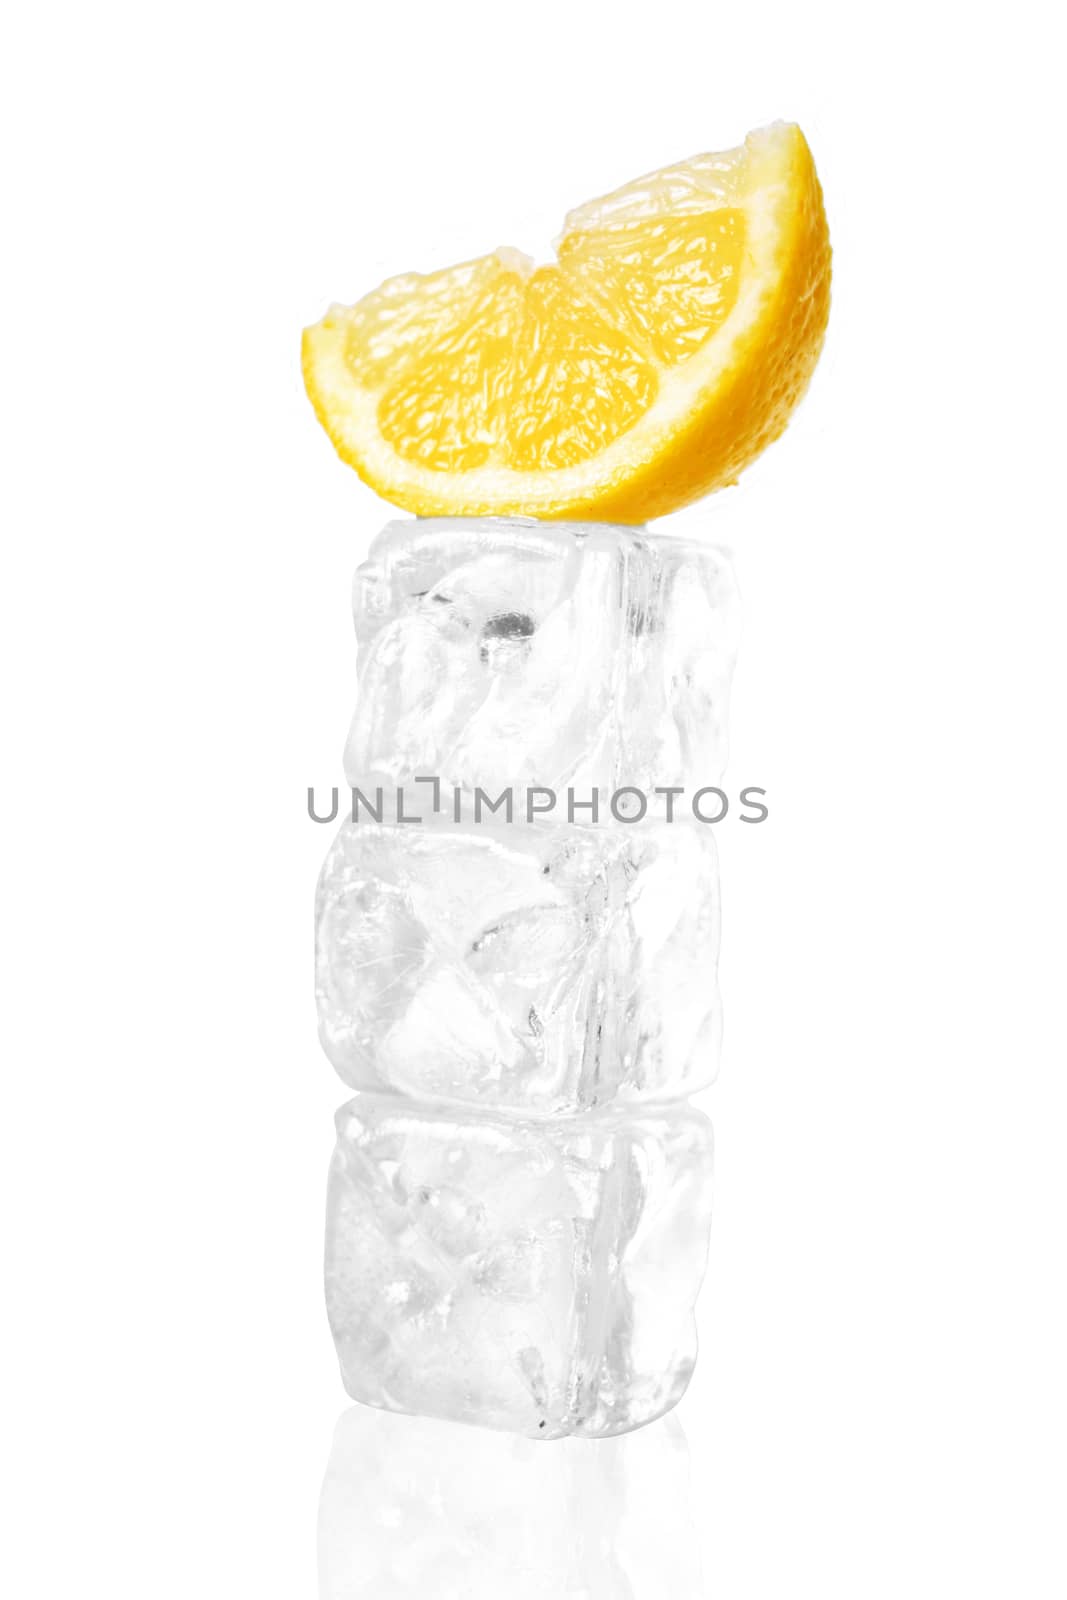 ice cube and orange by Tomjac1980